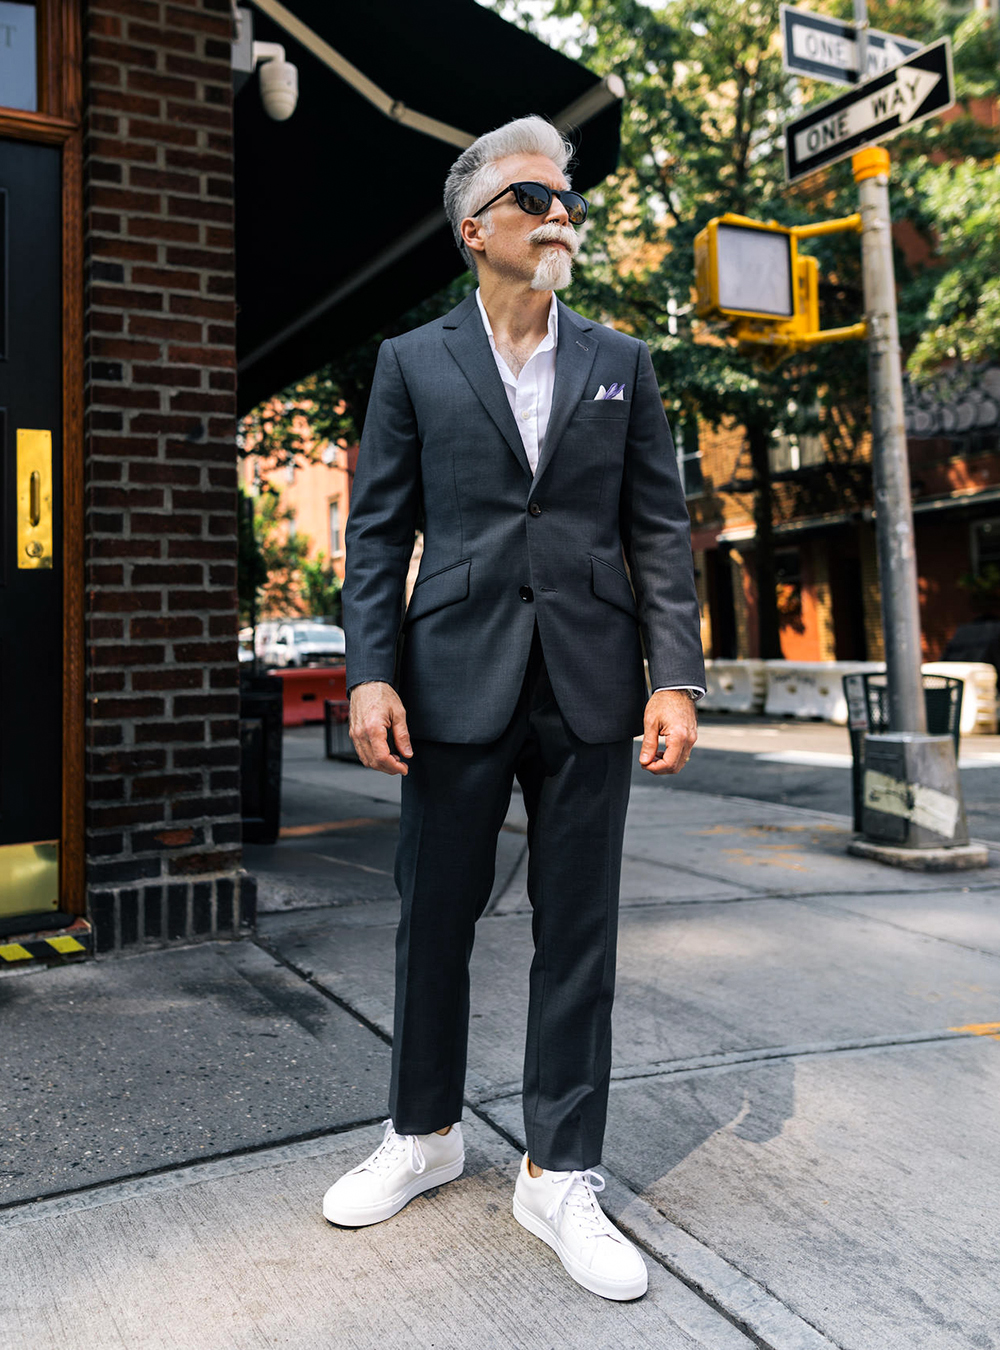 charcoal grey suit, white dress shirt, and white sneakers